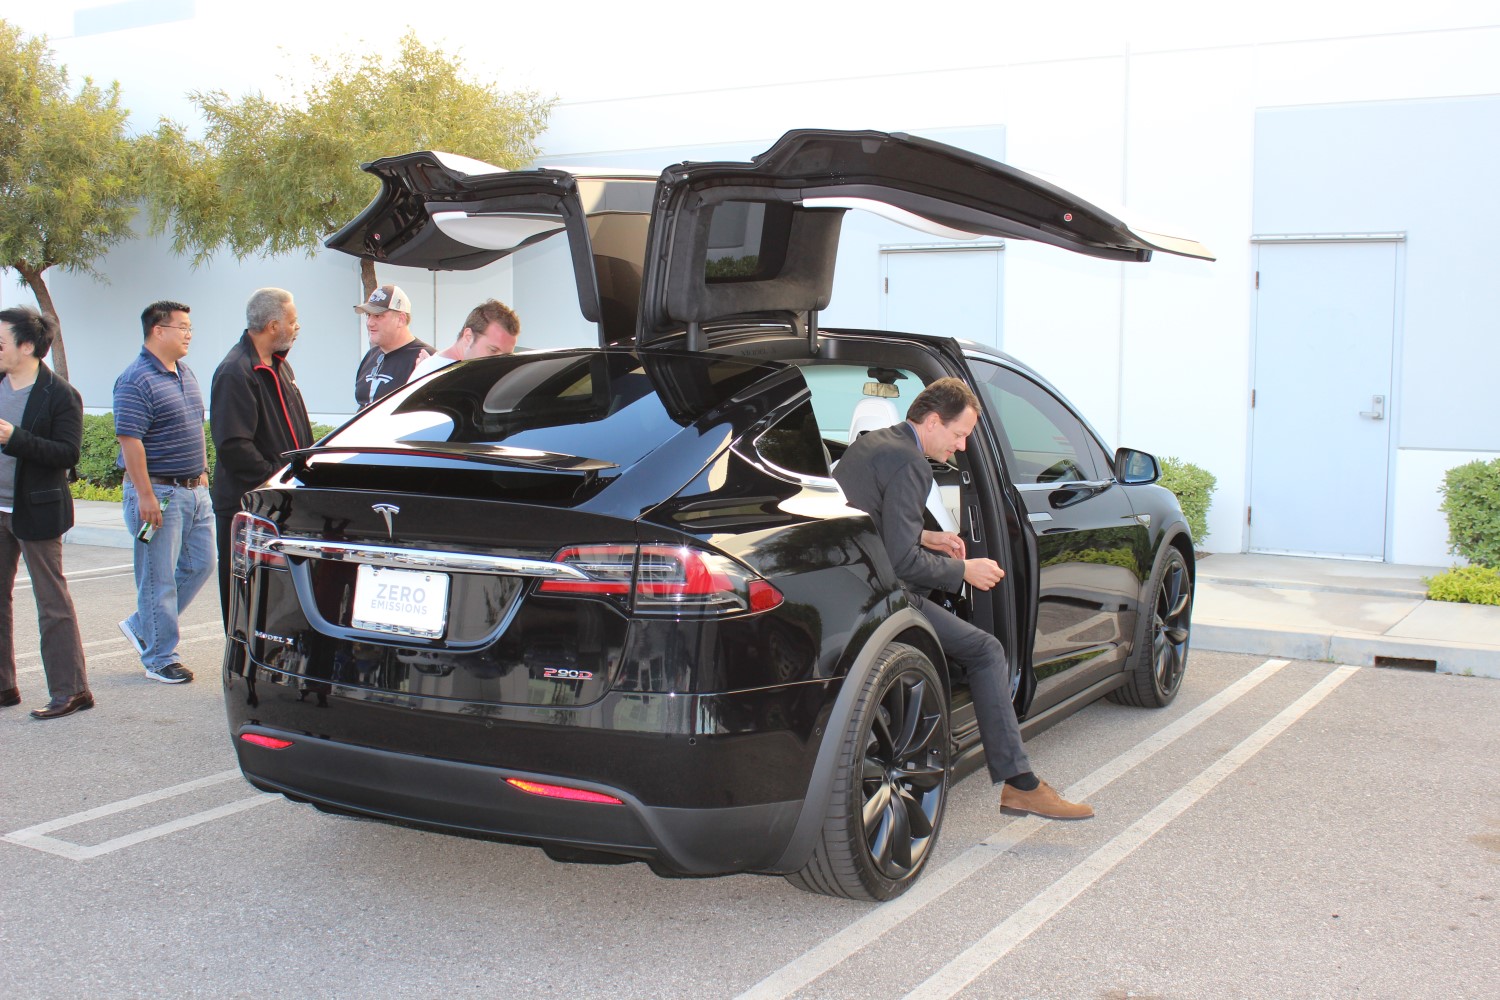 "You've got a seven-seater SUV that can beat a McLaren F1," Musk said. "That's nuts."